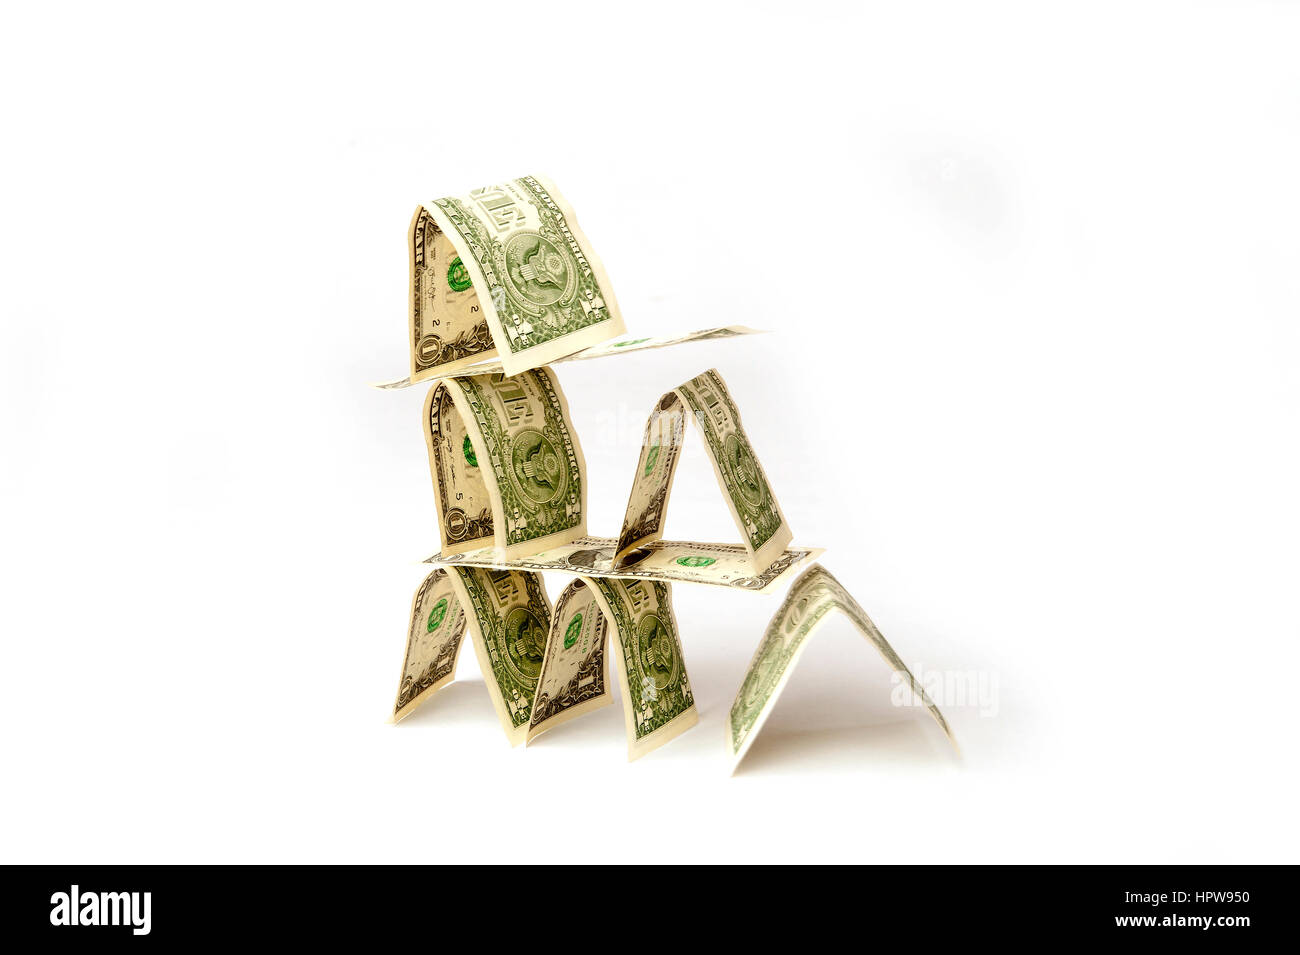 House built with U.S. dollar bills collapsing illustrating uncertainty in financial future. Stock Photo